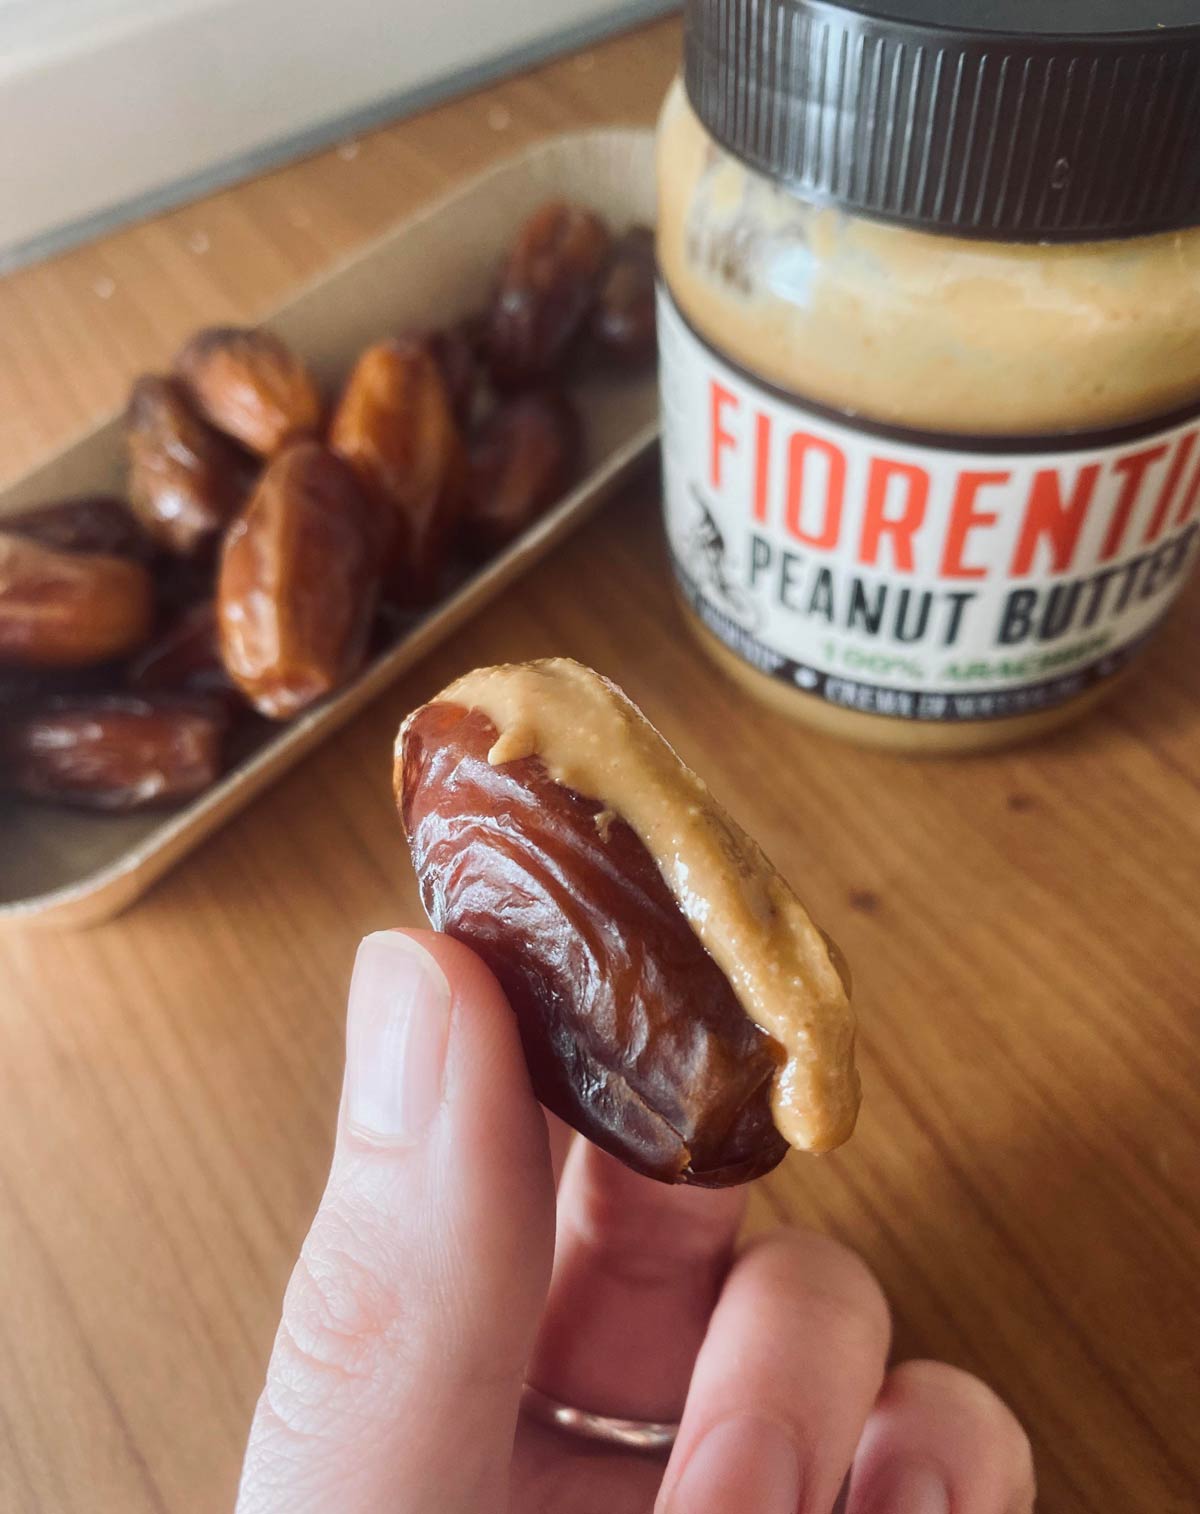 Cool Stuff - For Valentine’s Day, I will be spreading peanut butter all over my date